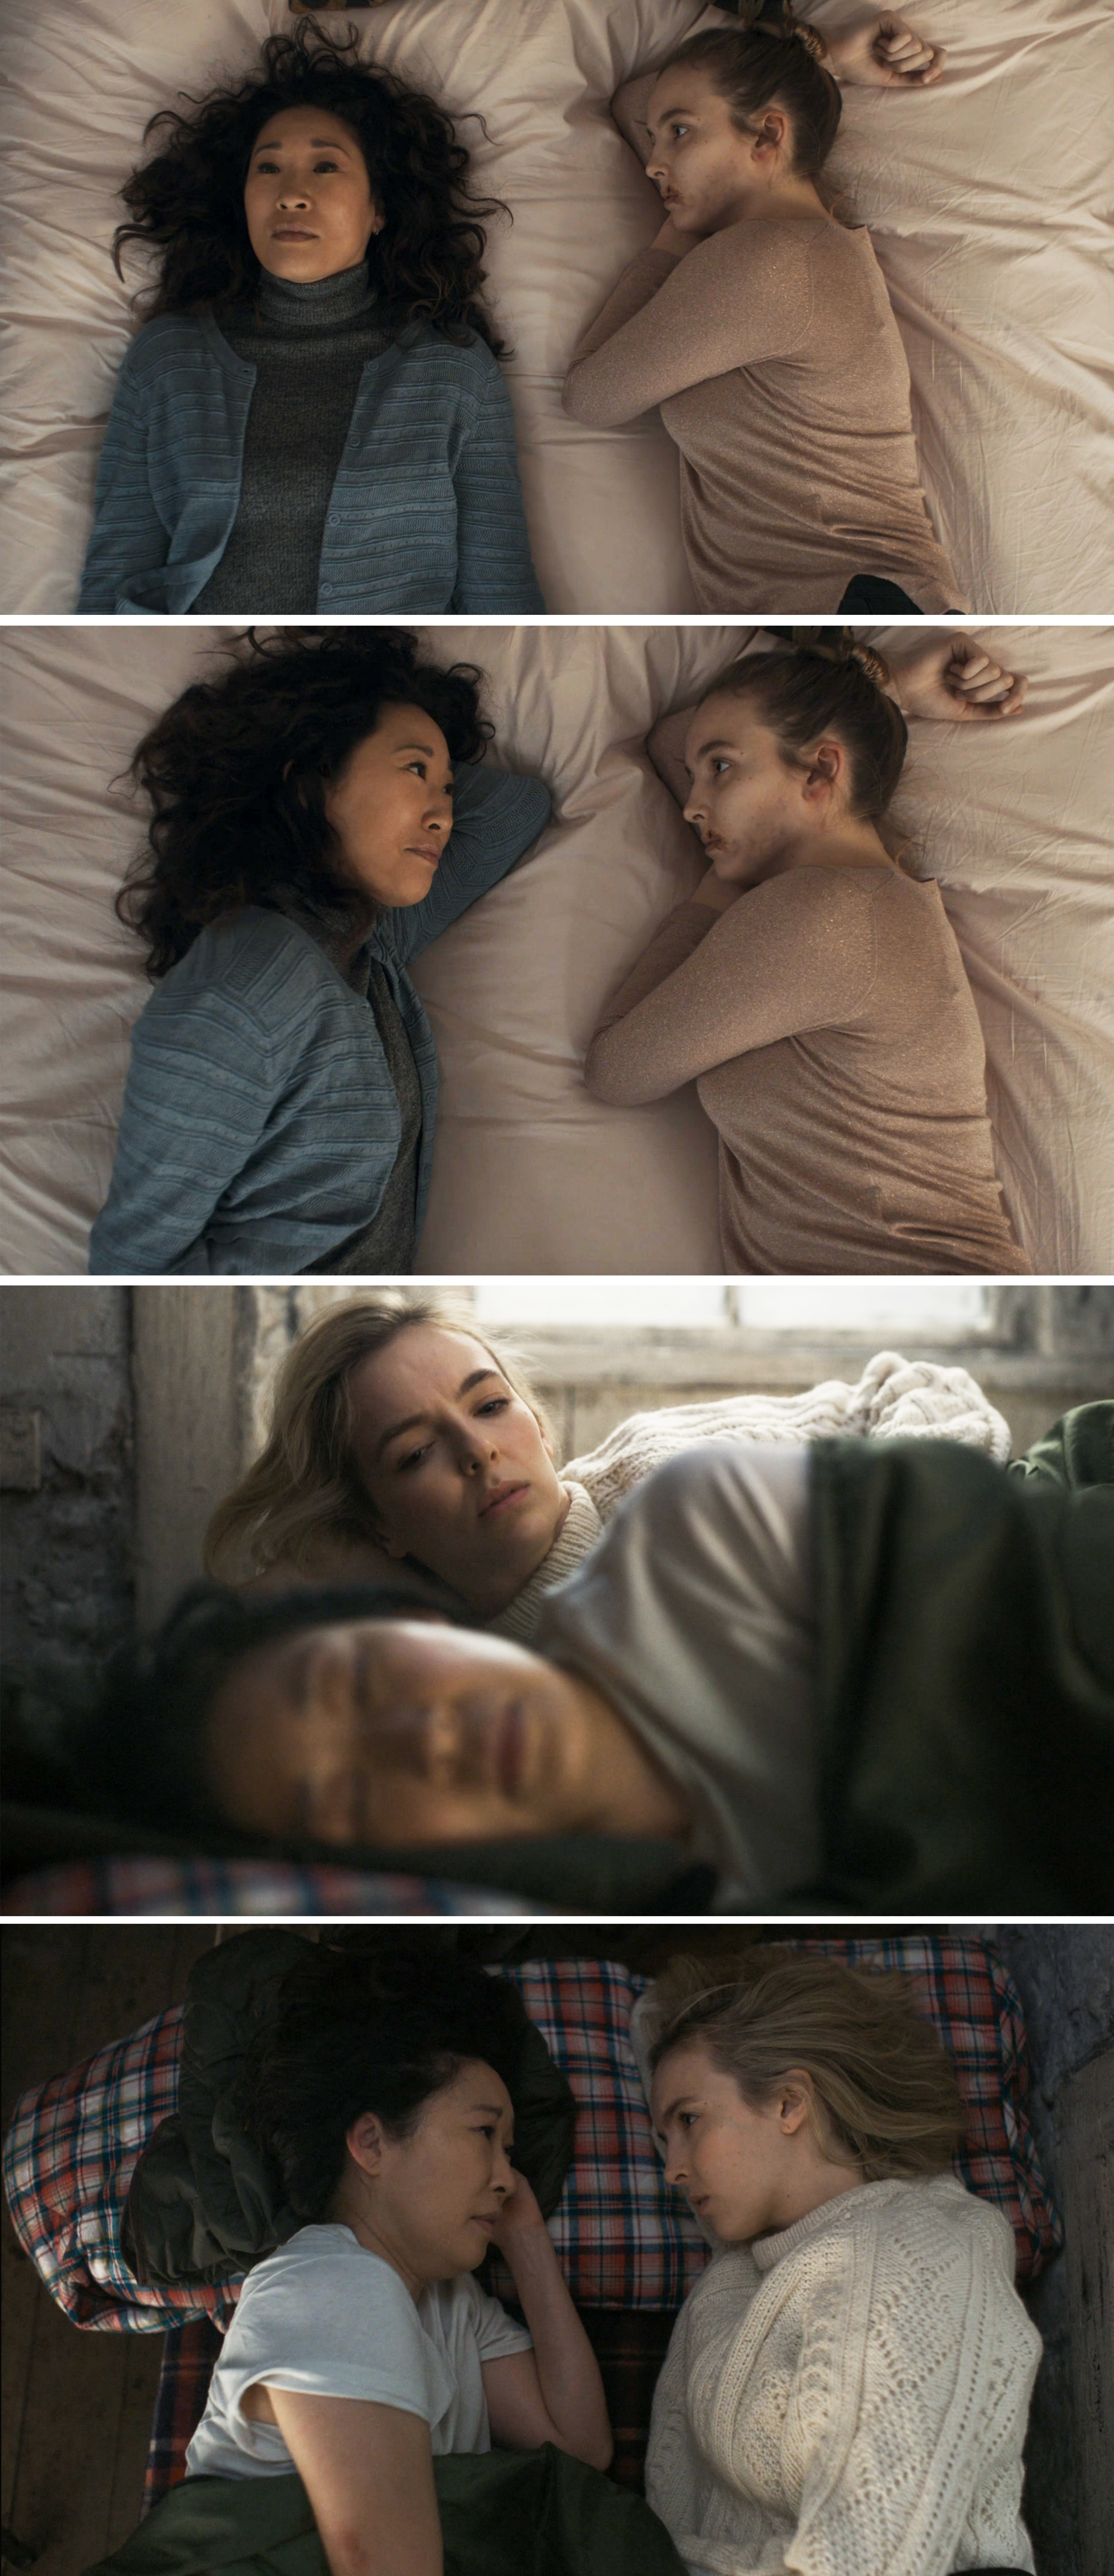 Villanelle and Eve laying in bed together